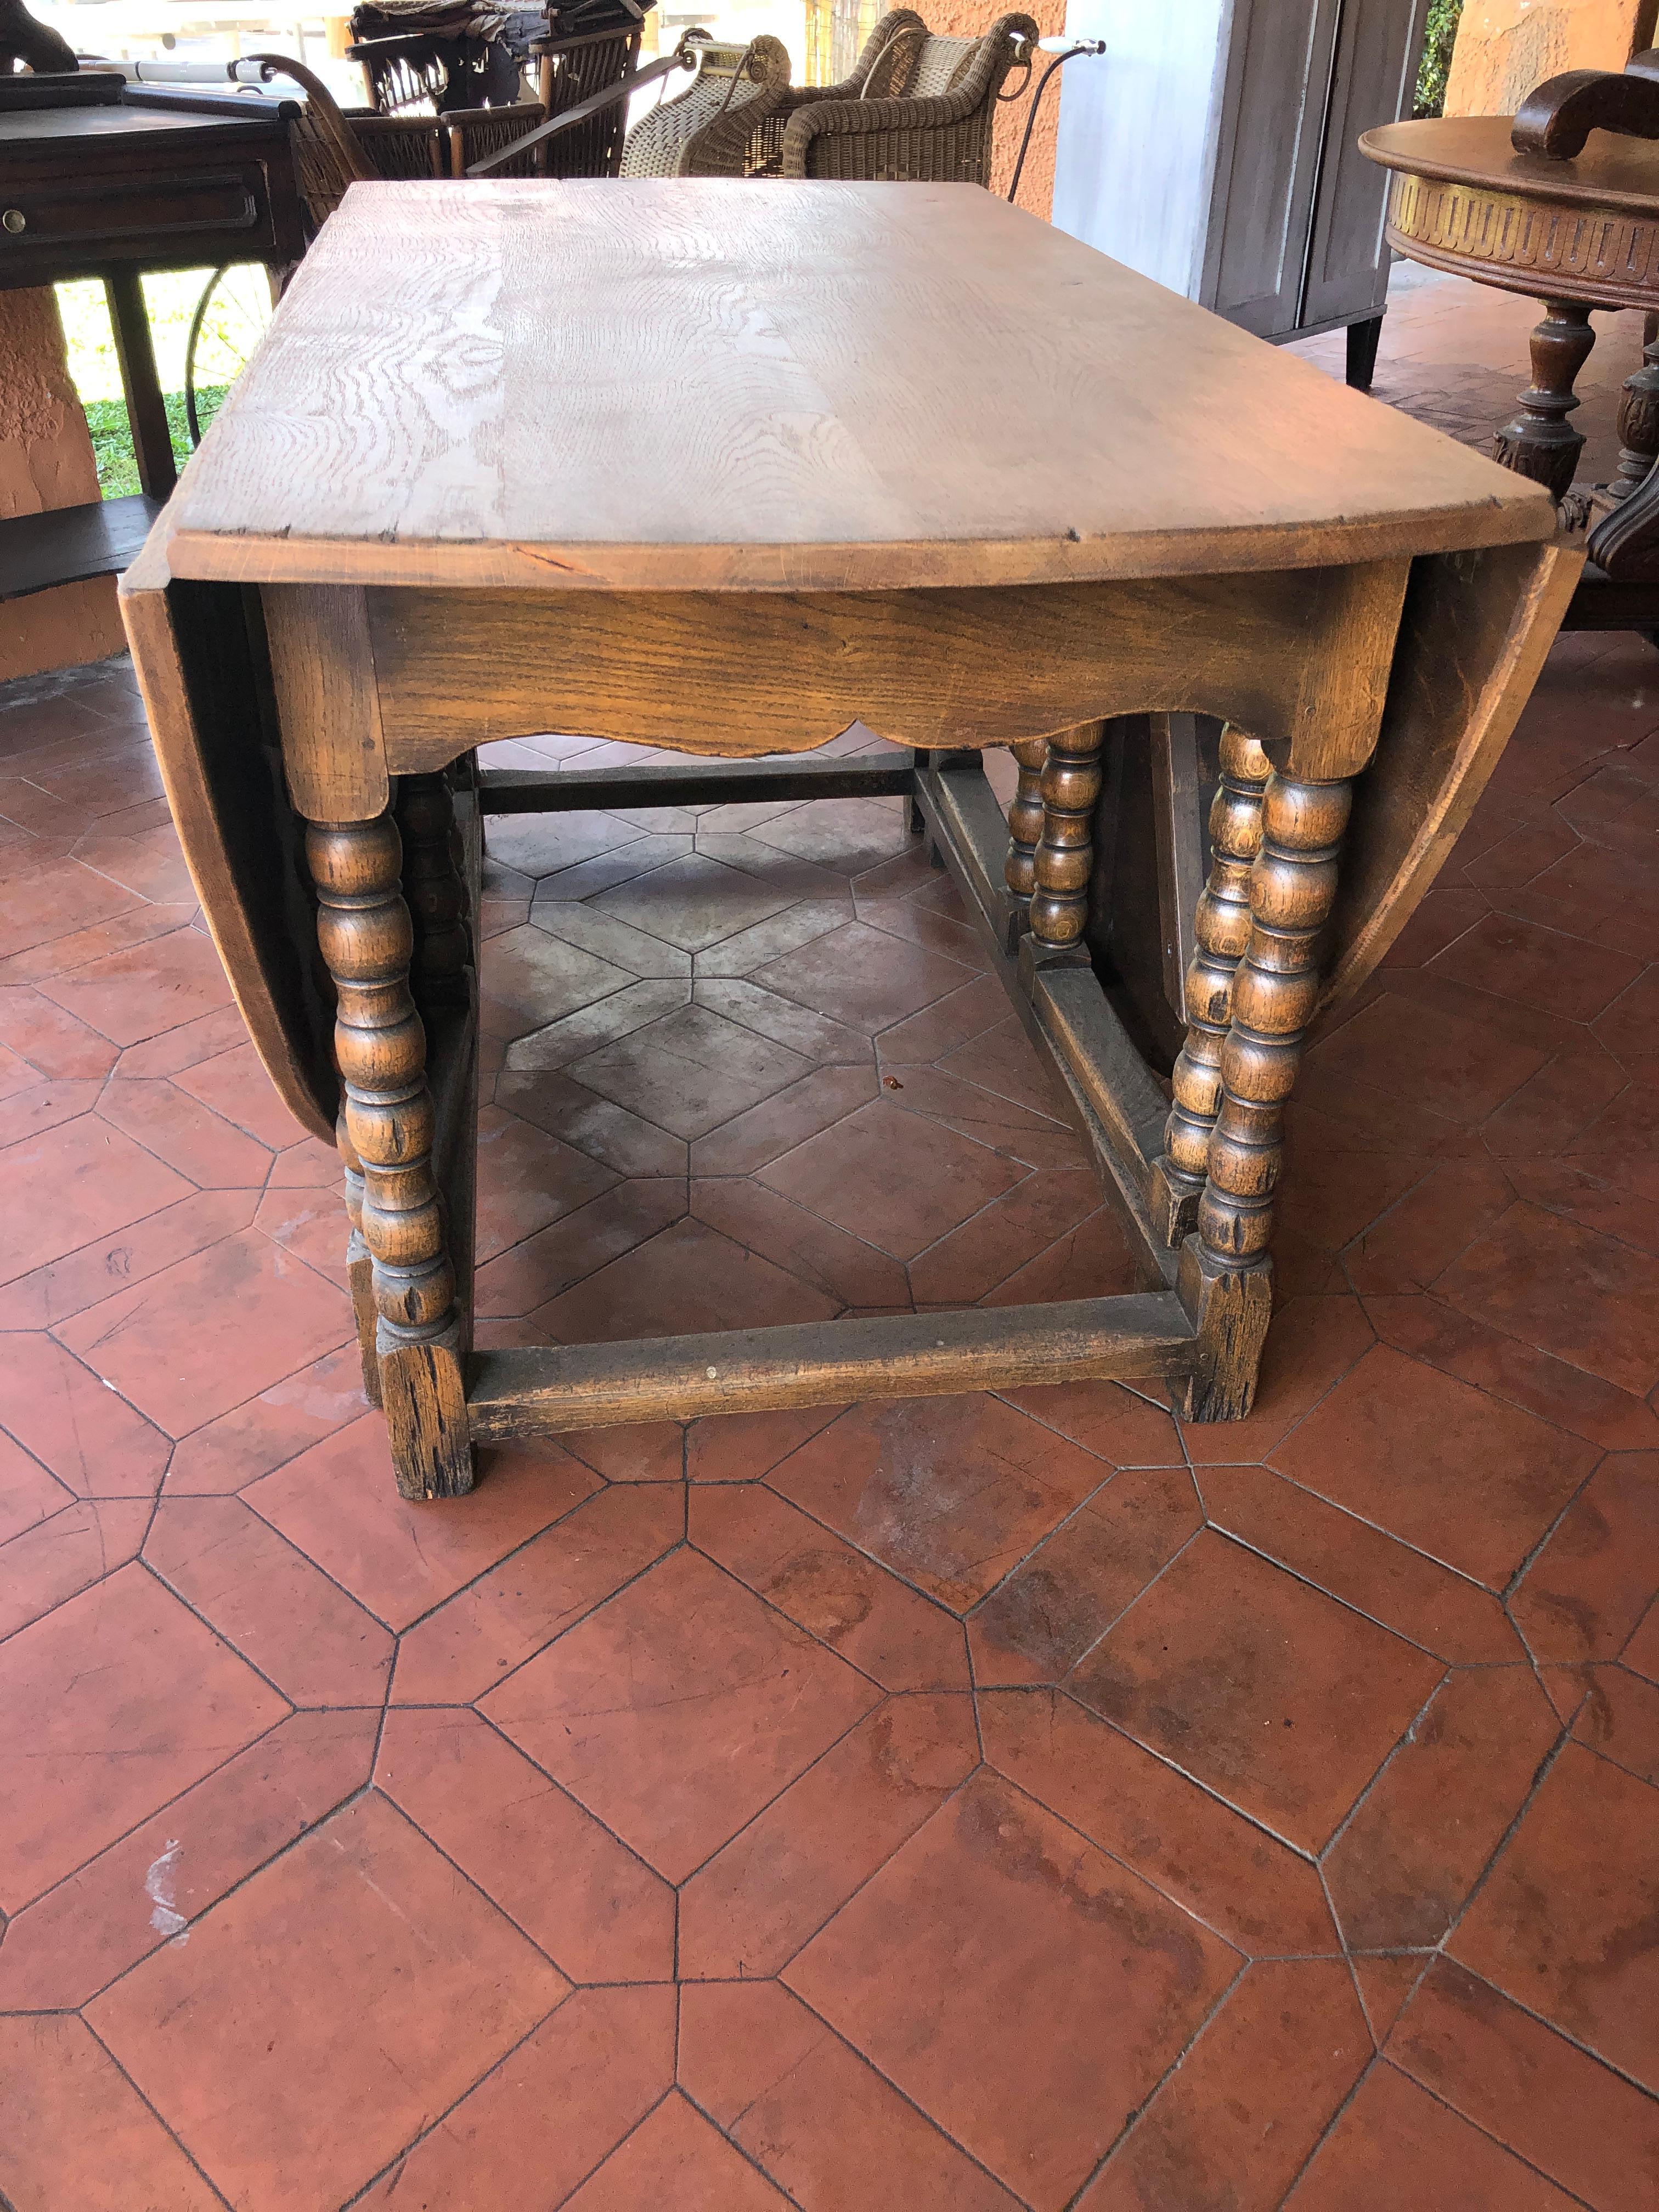 Drop-leaf table period William IV, in oak, to be restored, still in patina and in good structural condition. Of imposing size once opened, closed size 72 x 152 x 77 H, open is 211 x 152 x 77 H, the two lateral planes are 69 cm each. The compactness